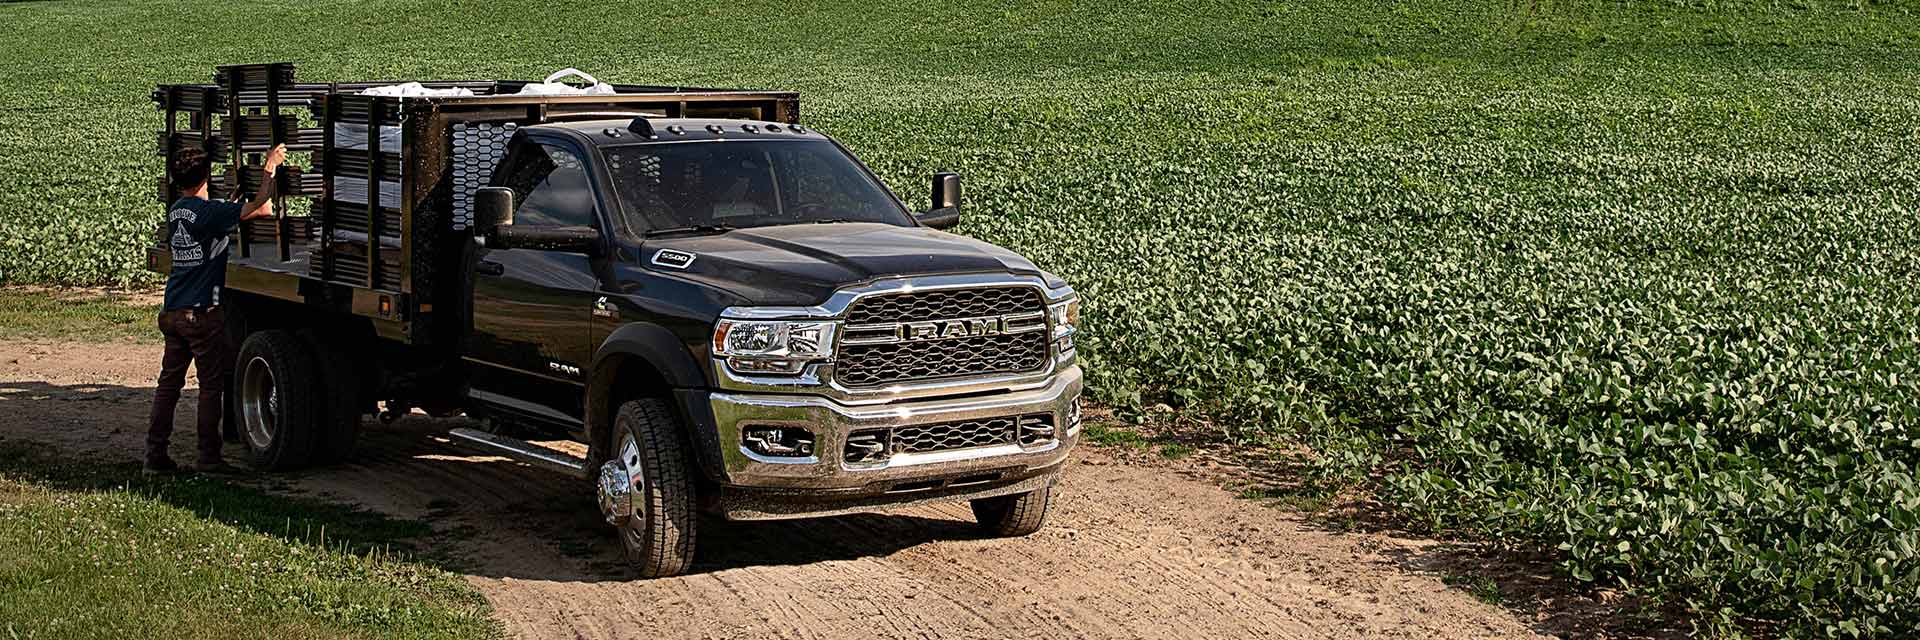 The 2022 Ram Chassis Cab with a stake bed upfit, parked on a dirt road between fields of crops.